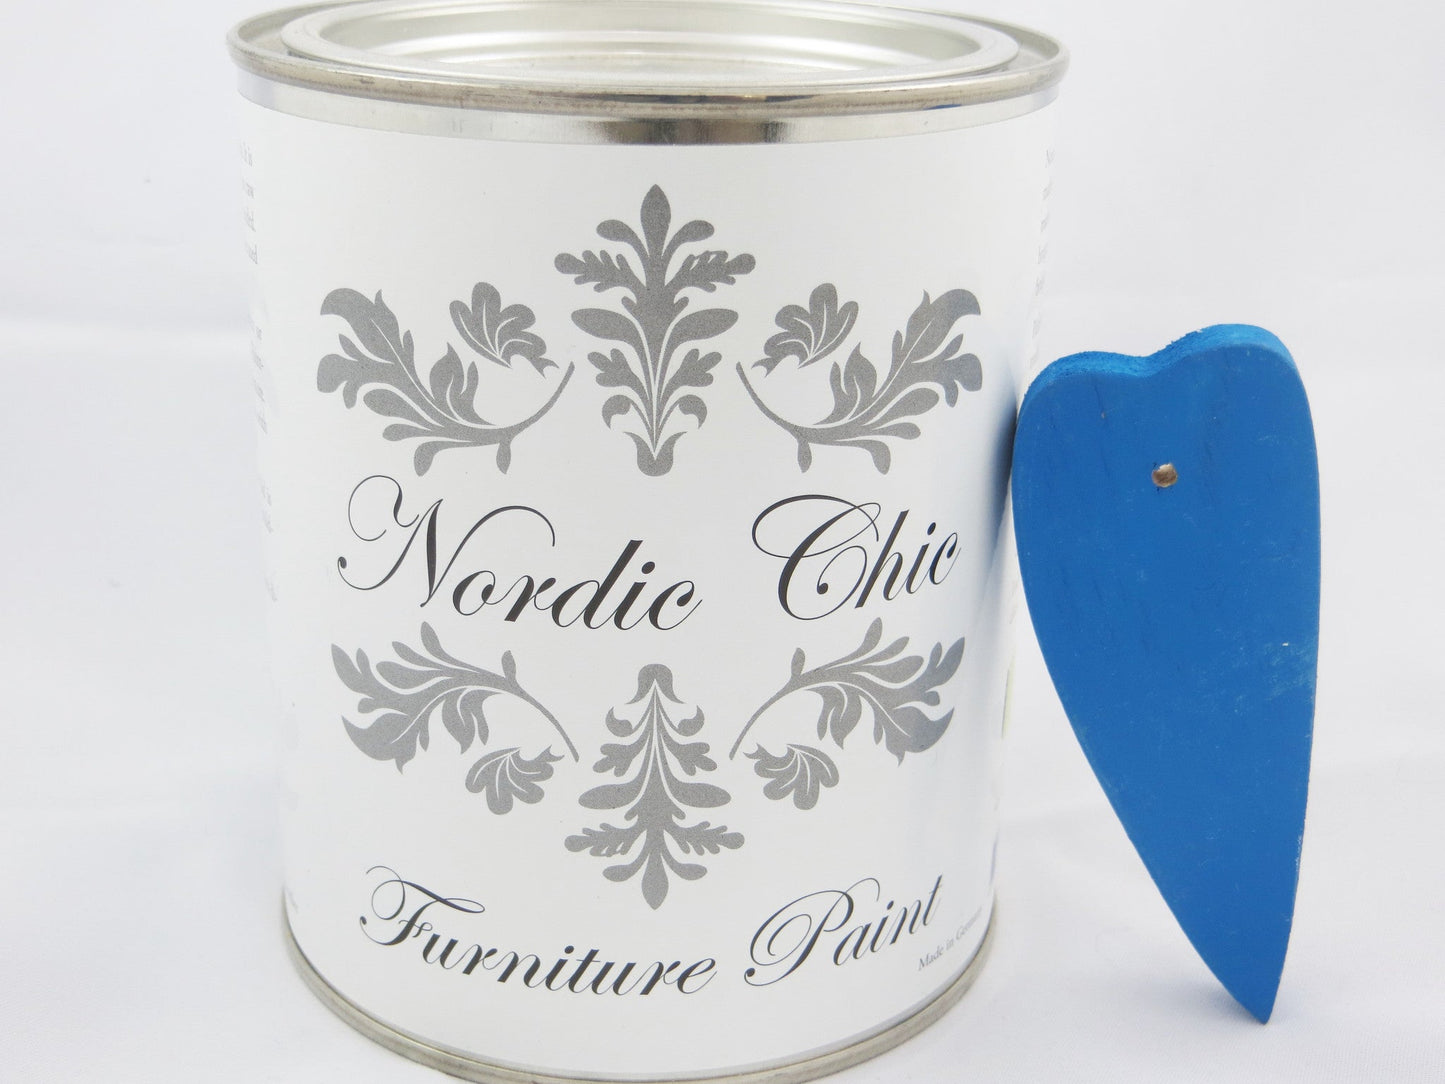 Nordic Chic Furniture Paint - Blue Eyes - Nordic Chic®